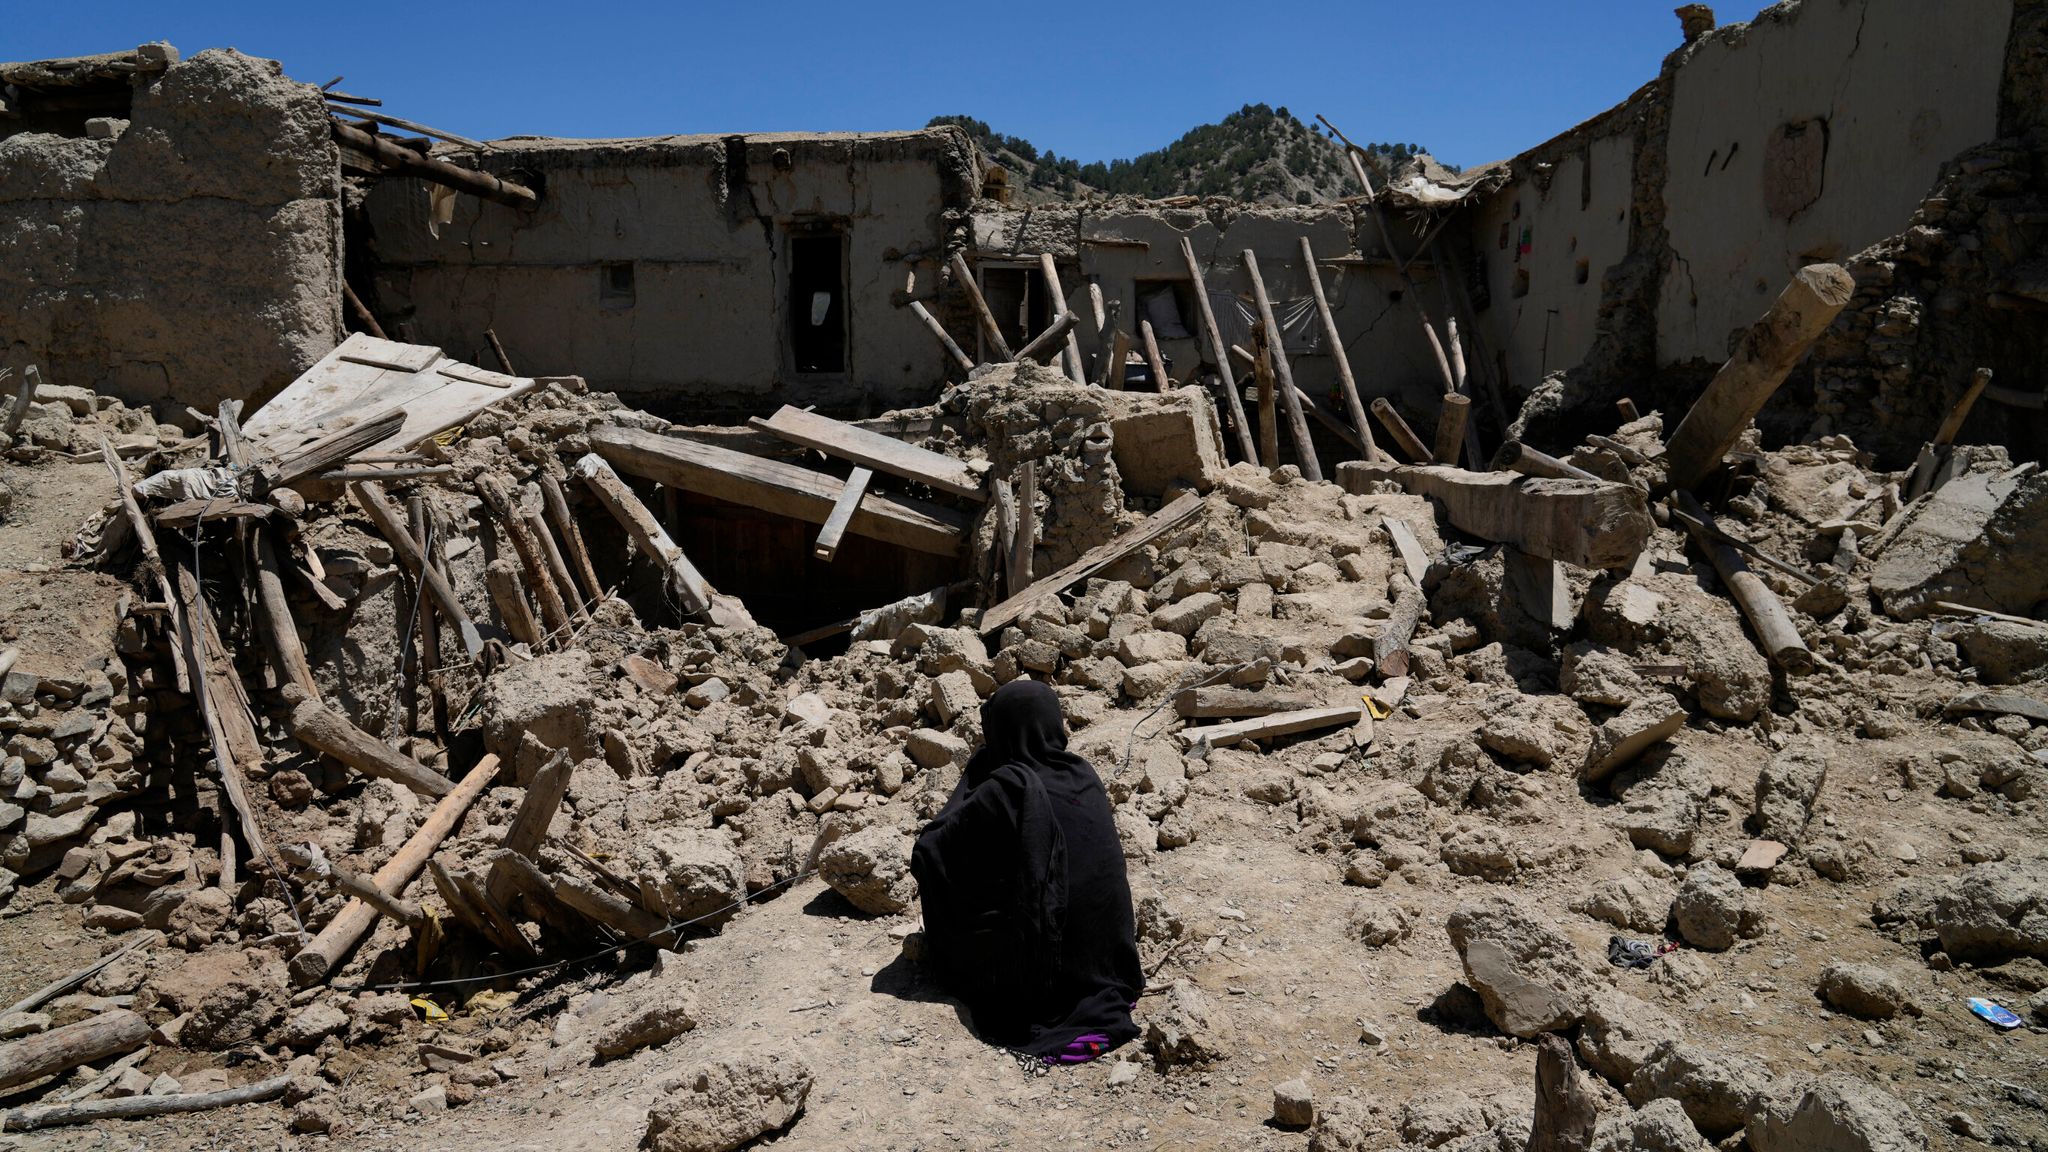 Earthquake in Afghanistan People are calling for help from the